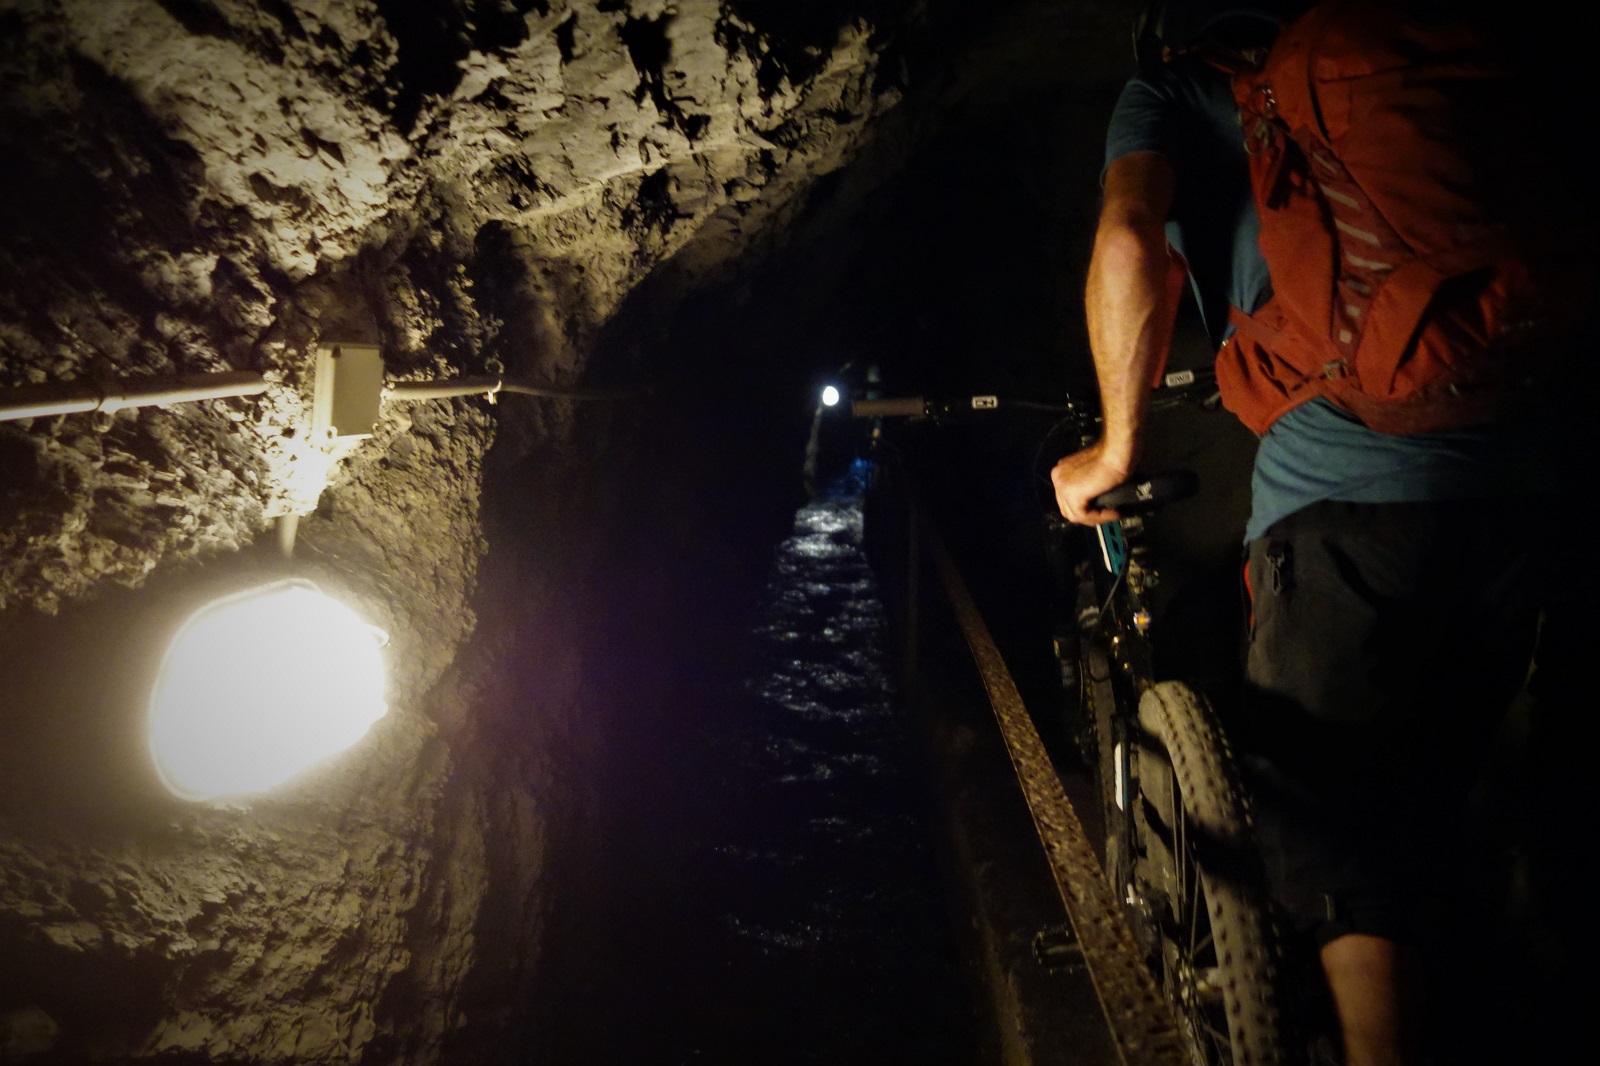 So when was the last time you started a ride at 3000m altitude and had to take a subterranean water way to get to the end of it?